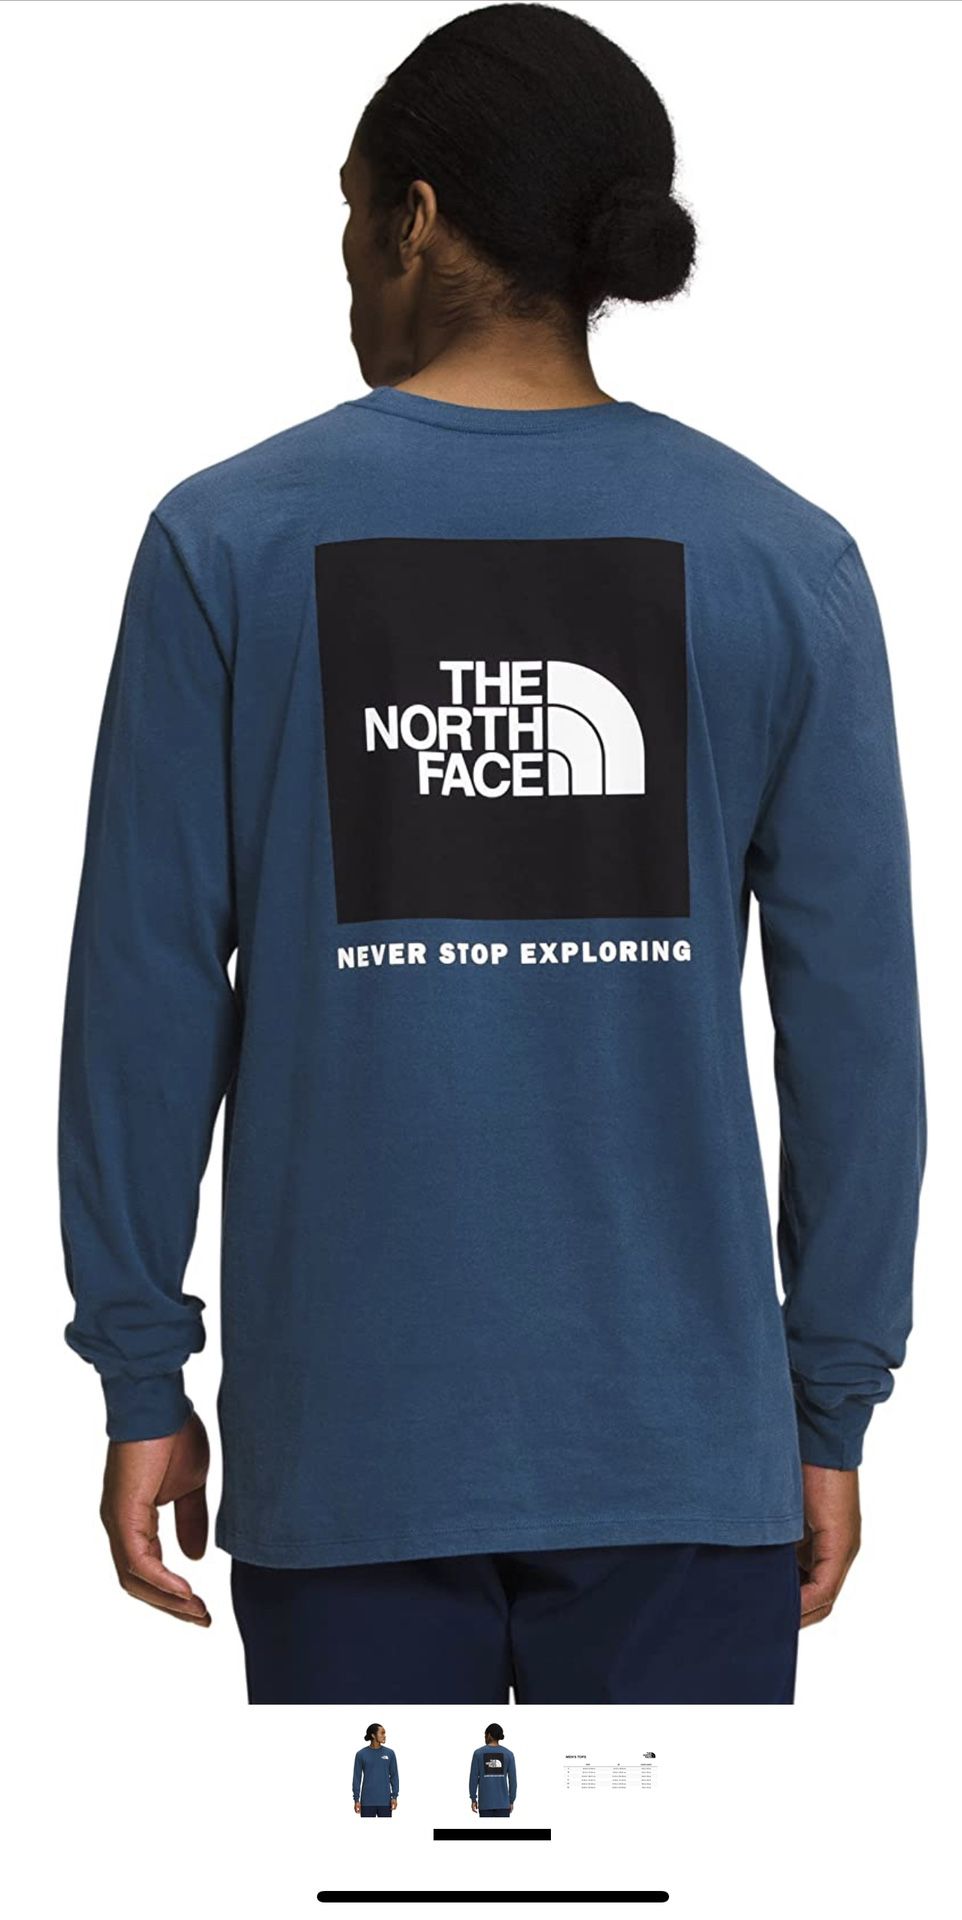 THE NORTH FACE Mens' Long Sleeve Tee